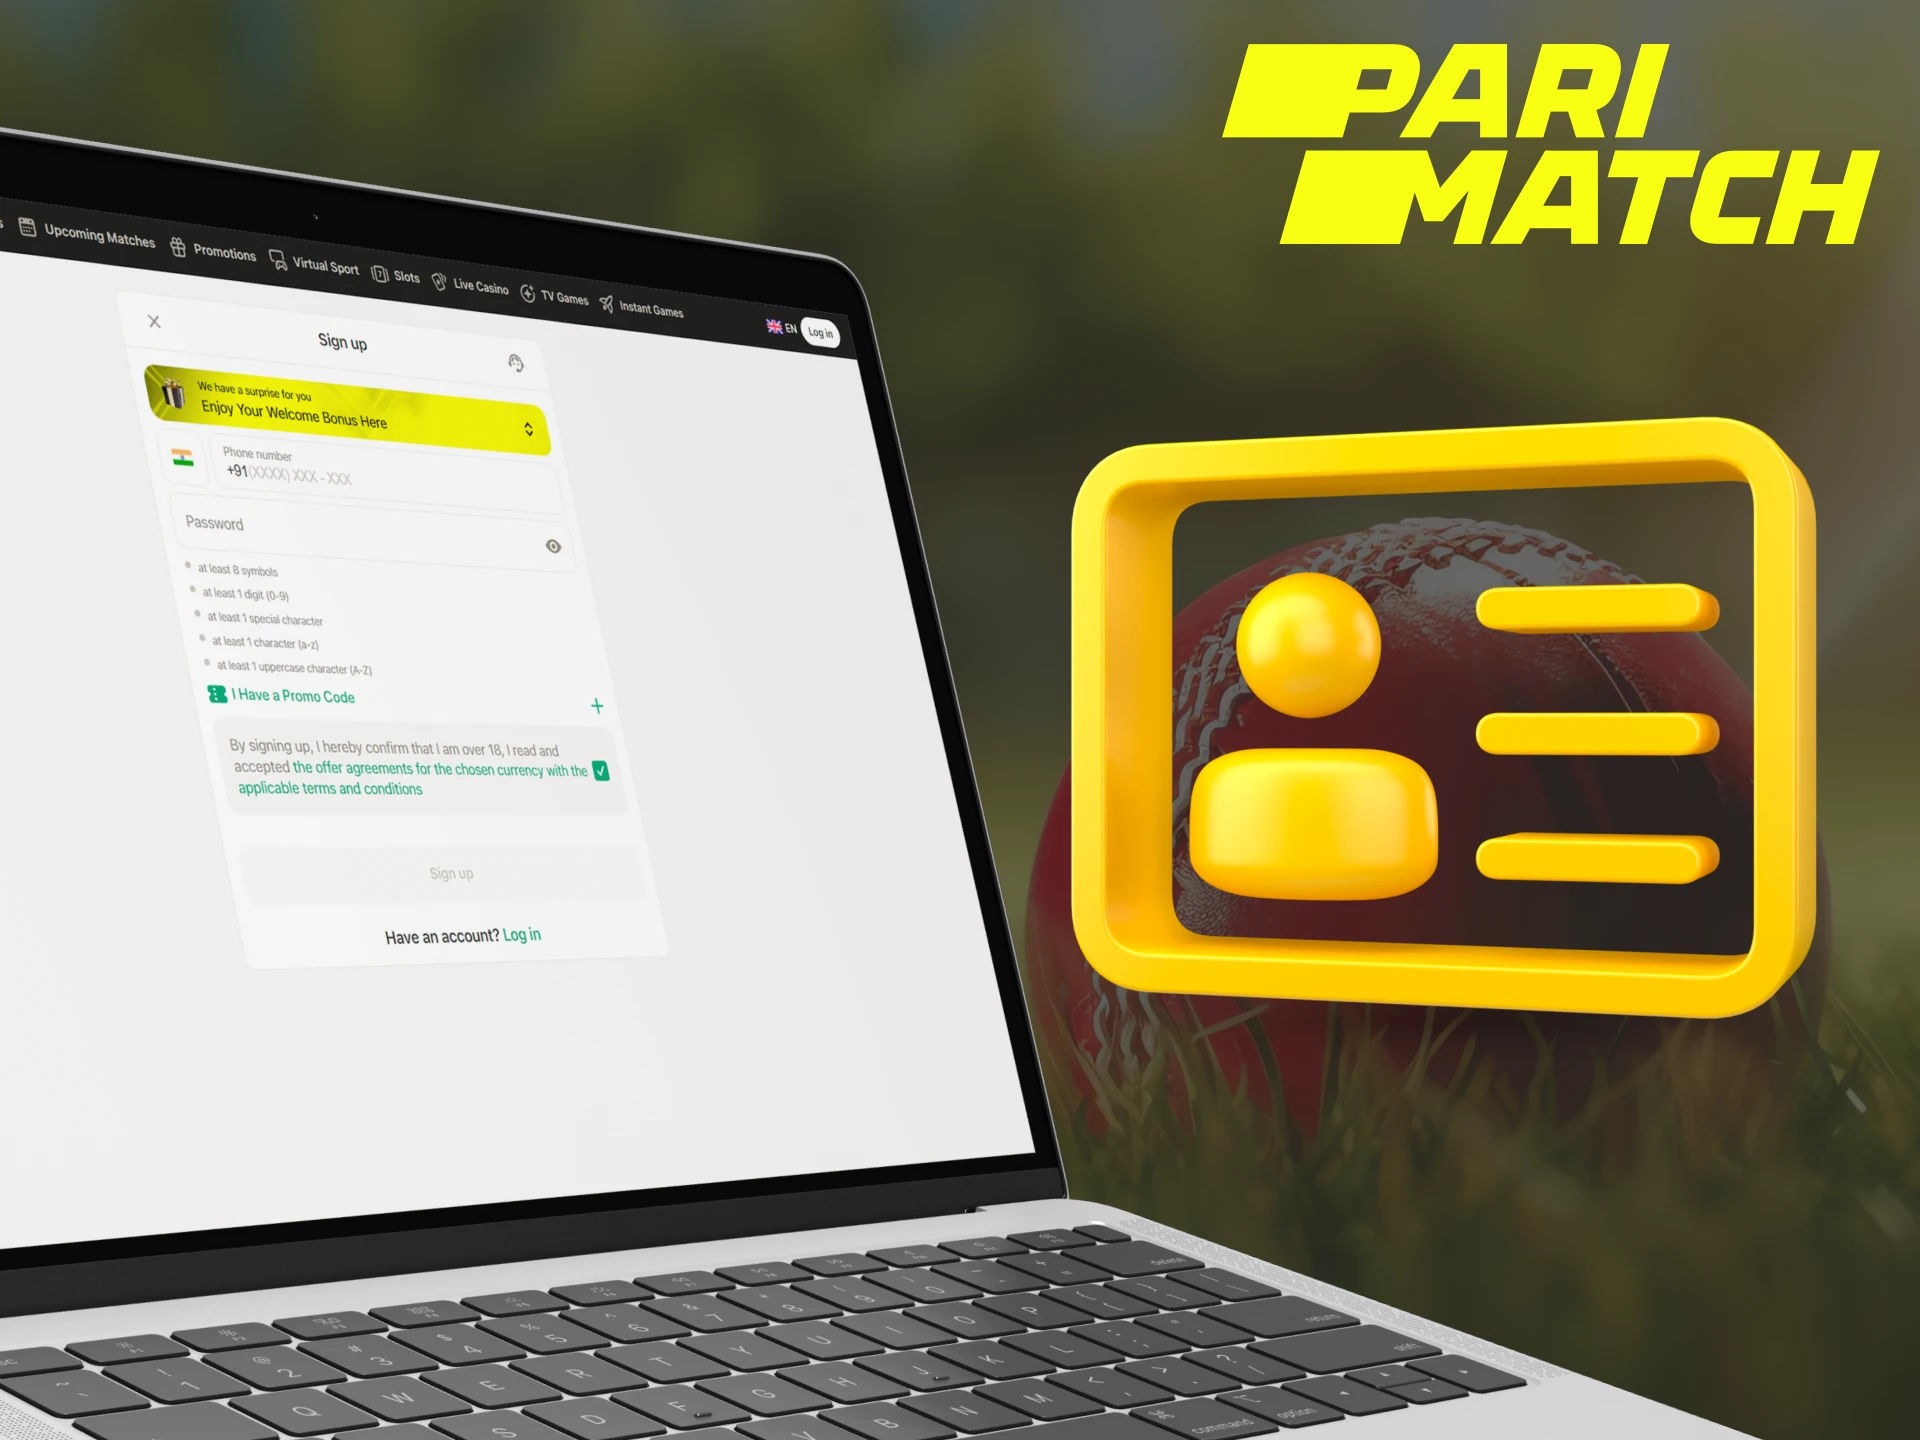 Register with Parimatch quickly and easily.